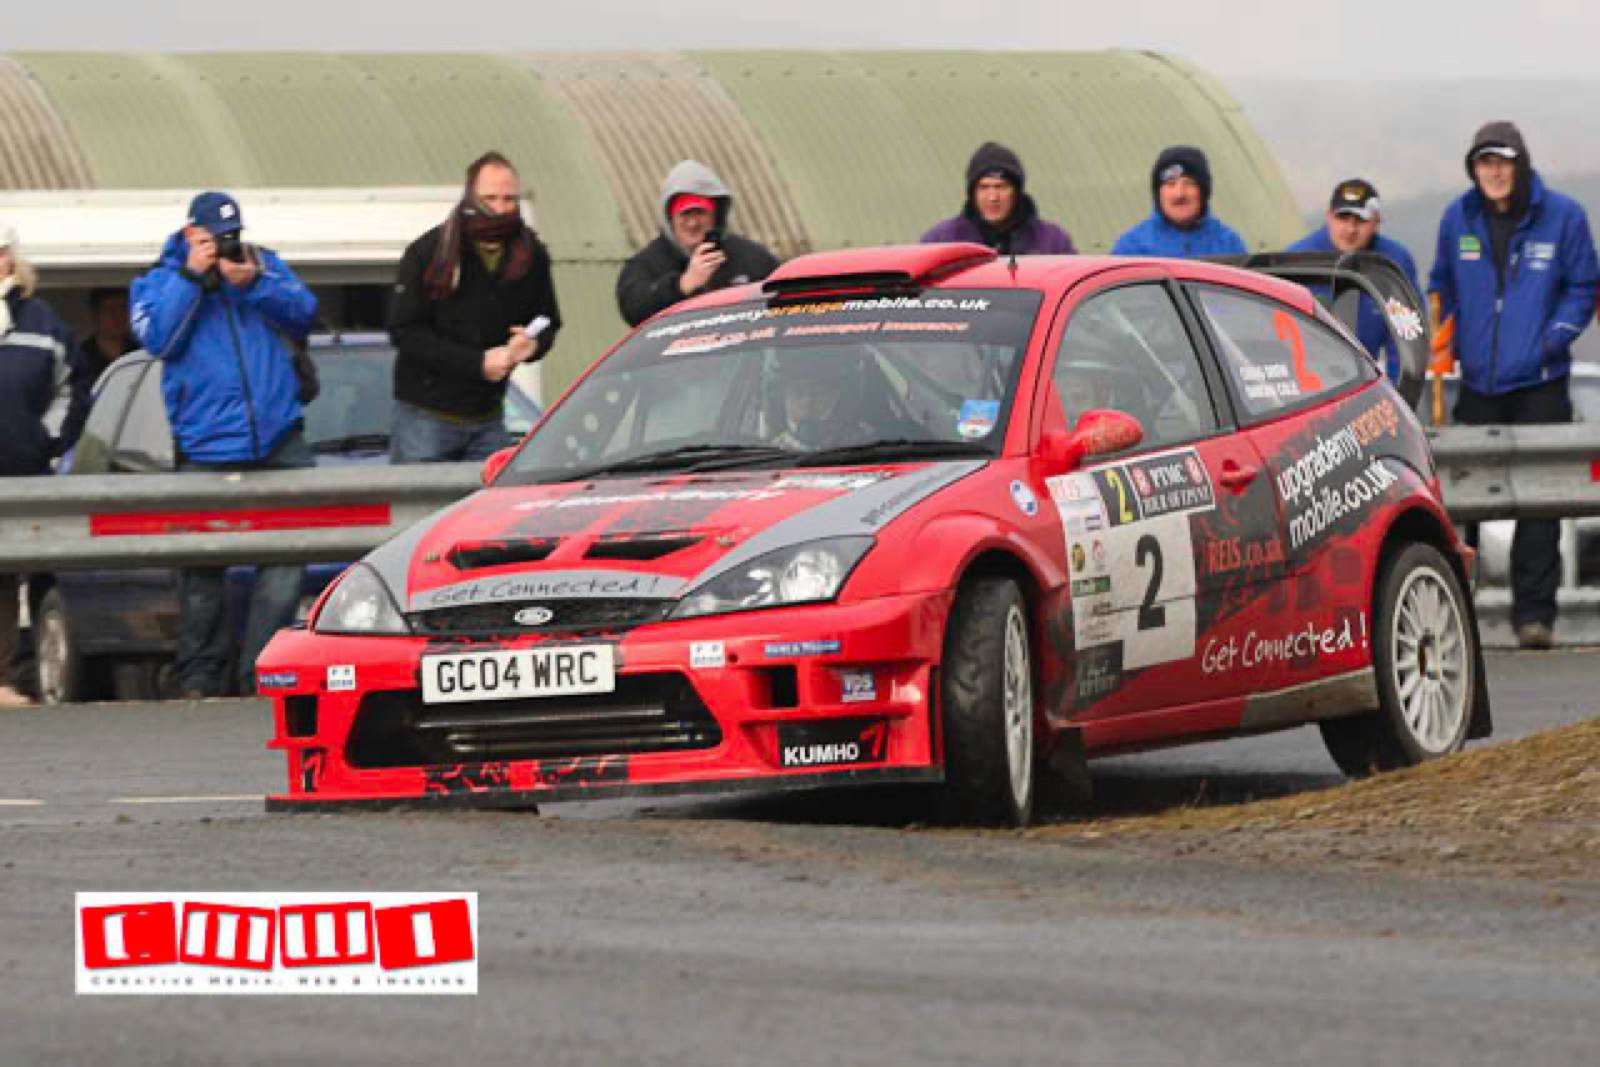 get-connected-rally-team-gallery-tou-of-epynt-2011-00007